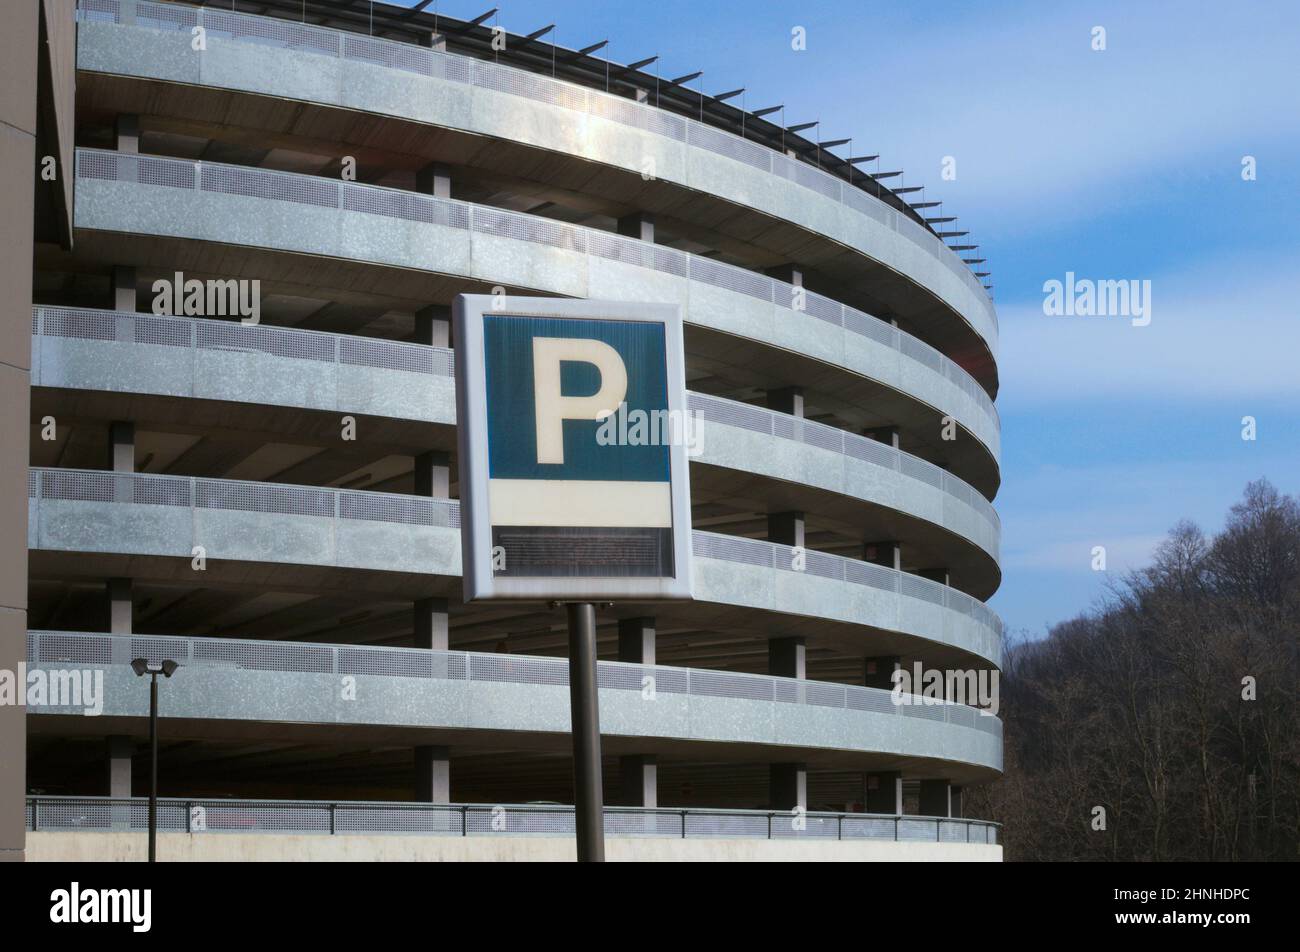 Parking sign and Multi-level Parking Garage Stock Photo